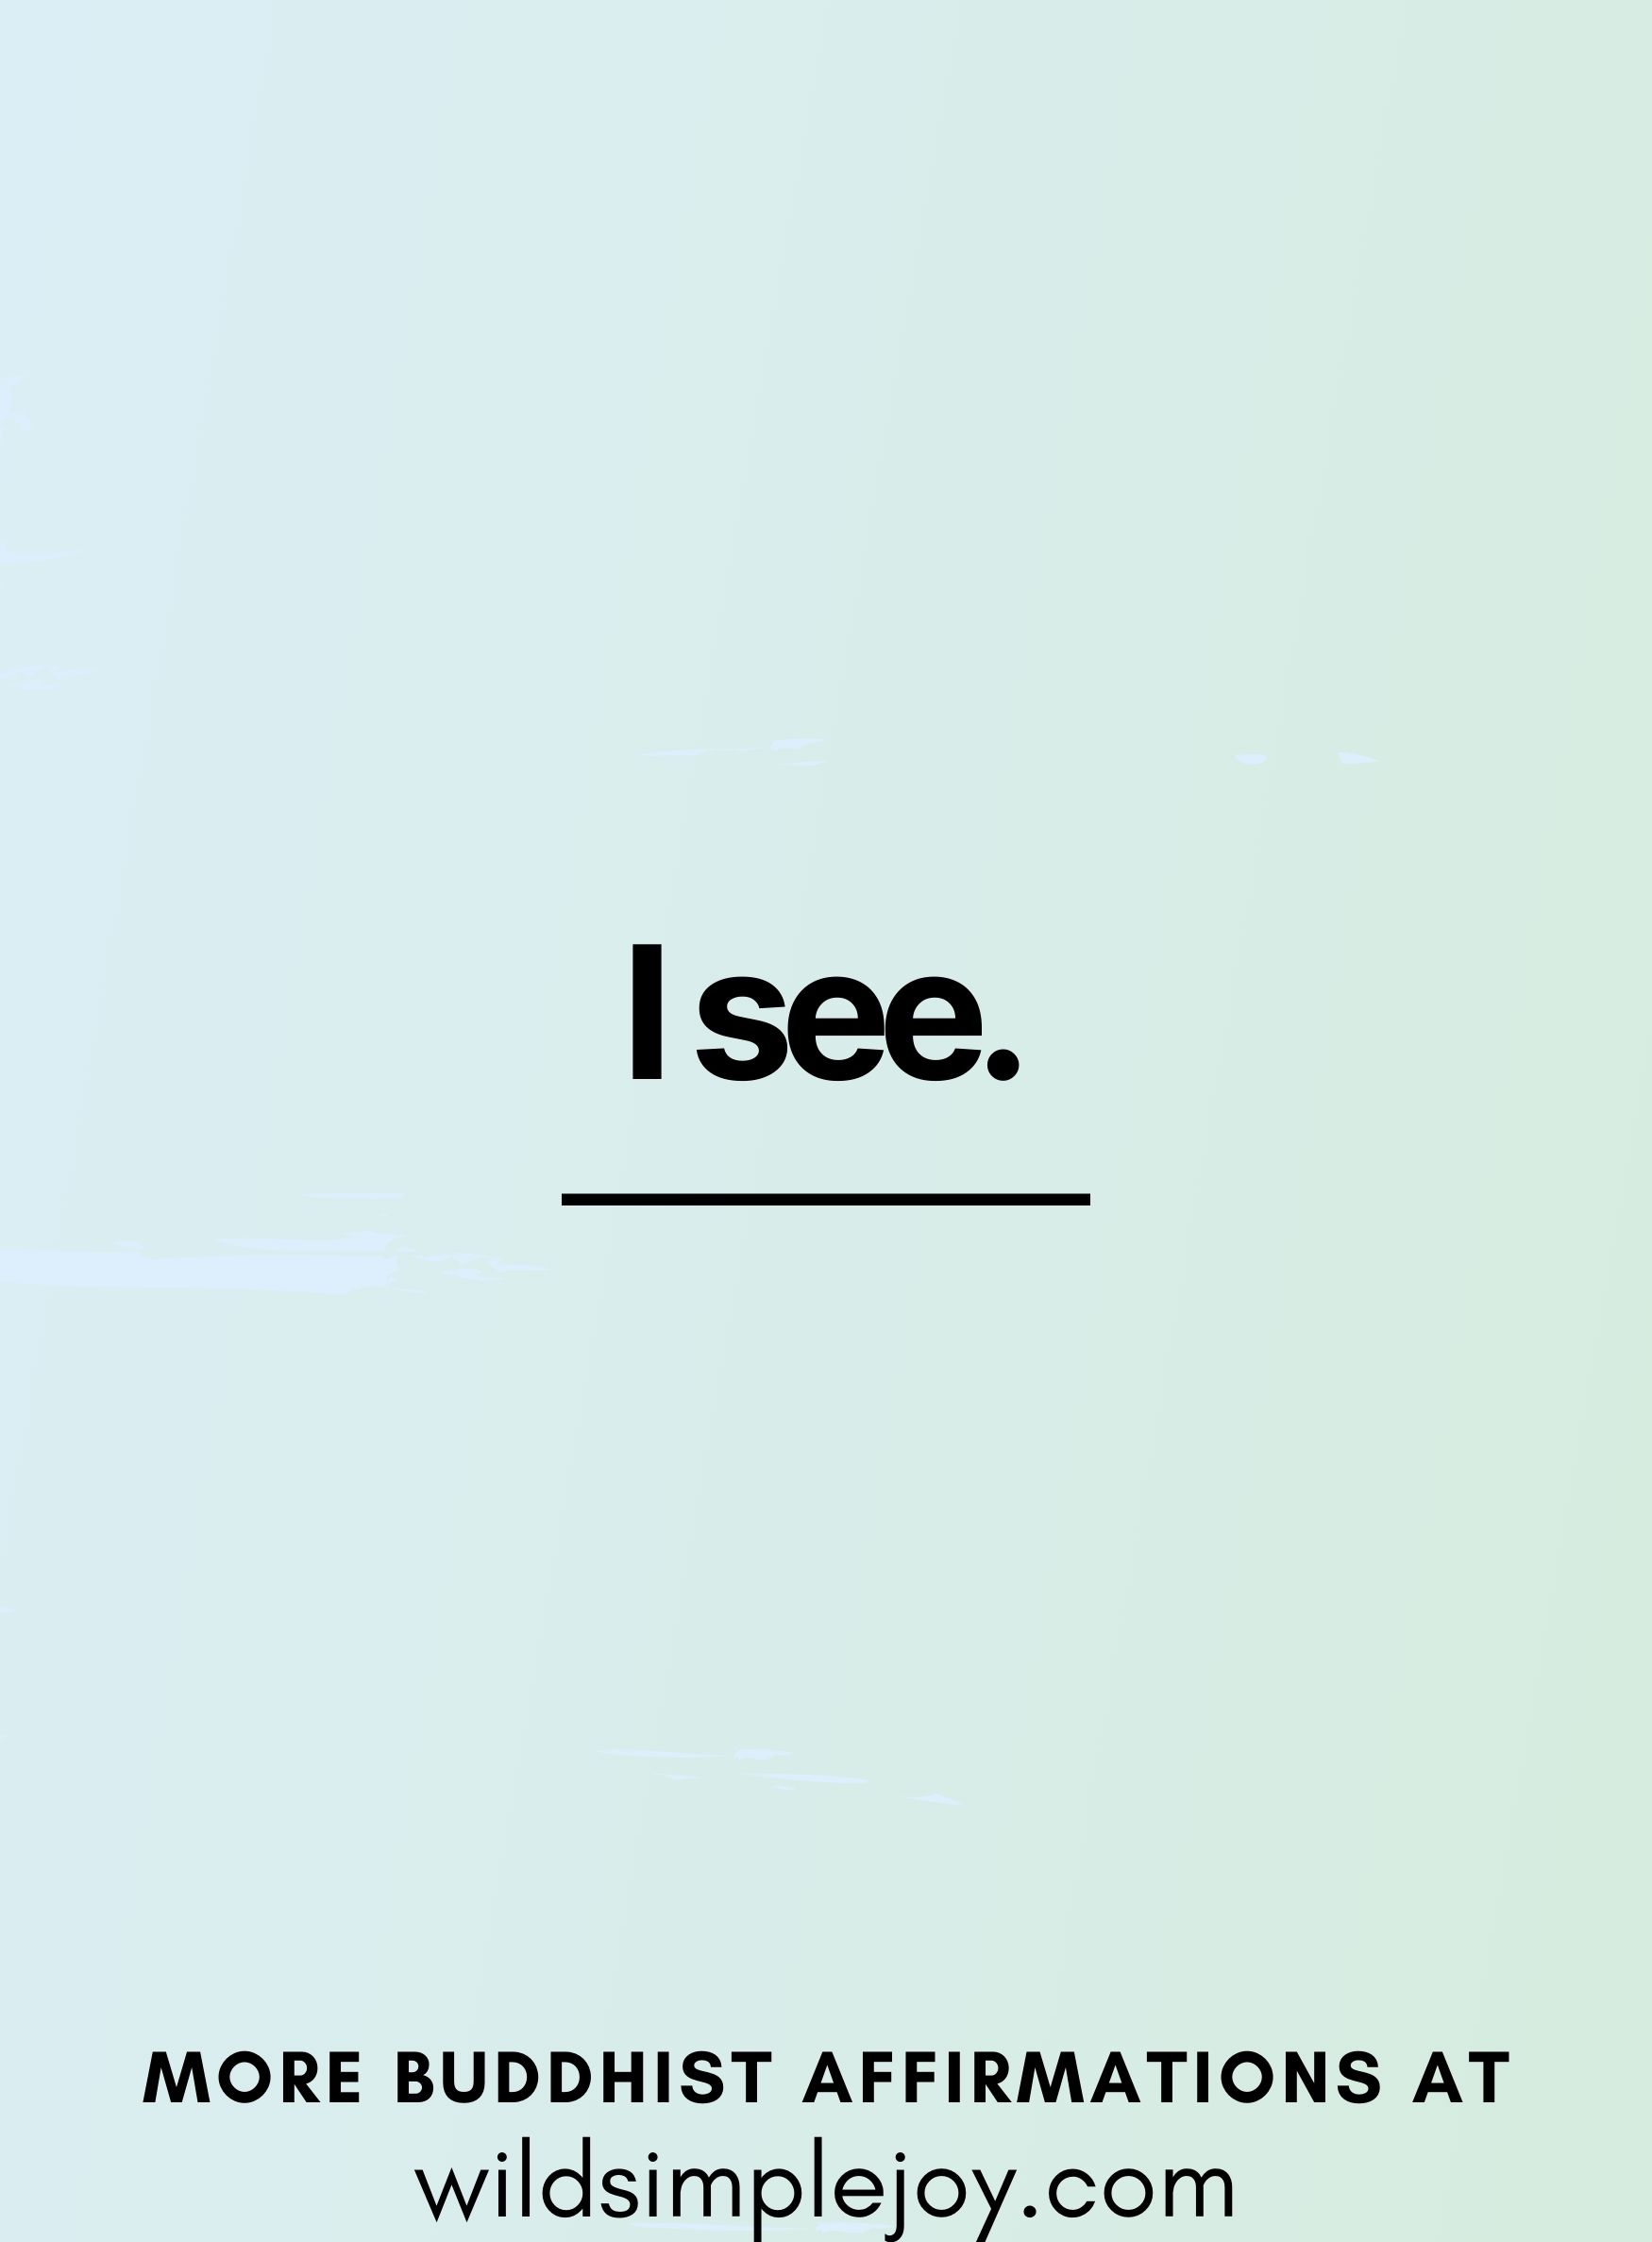 I see. Affirmations for Buddhism at wildsimplejoy.com (on a green and blue background)